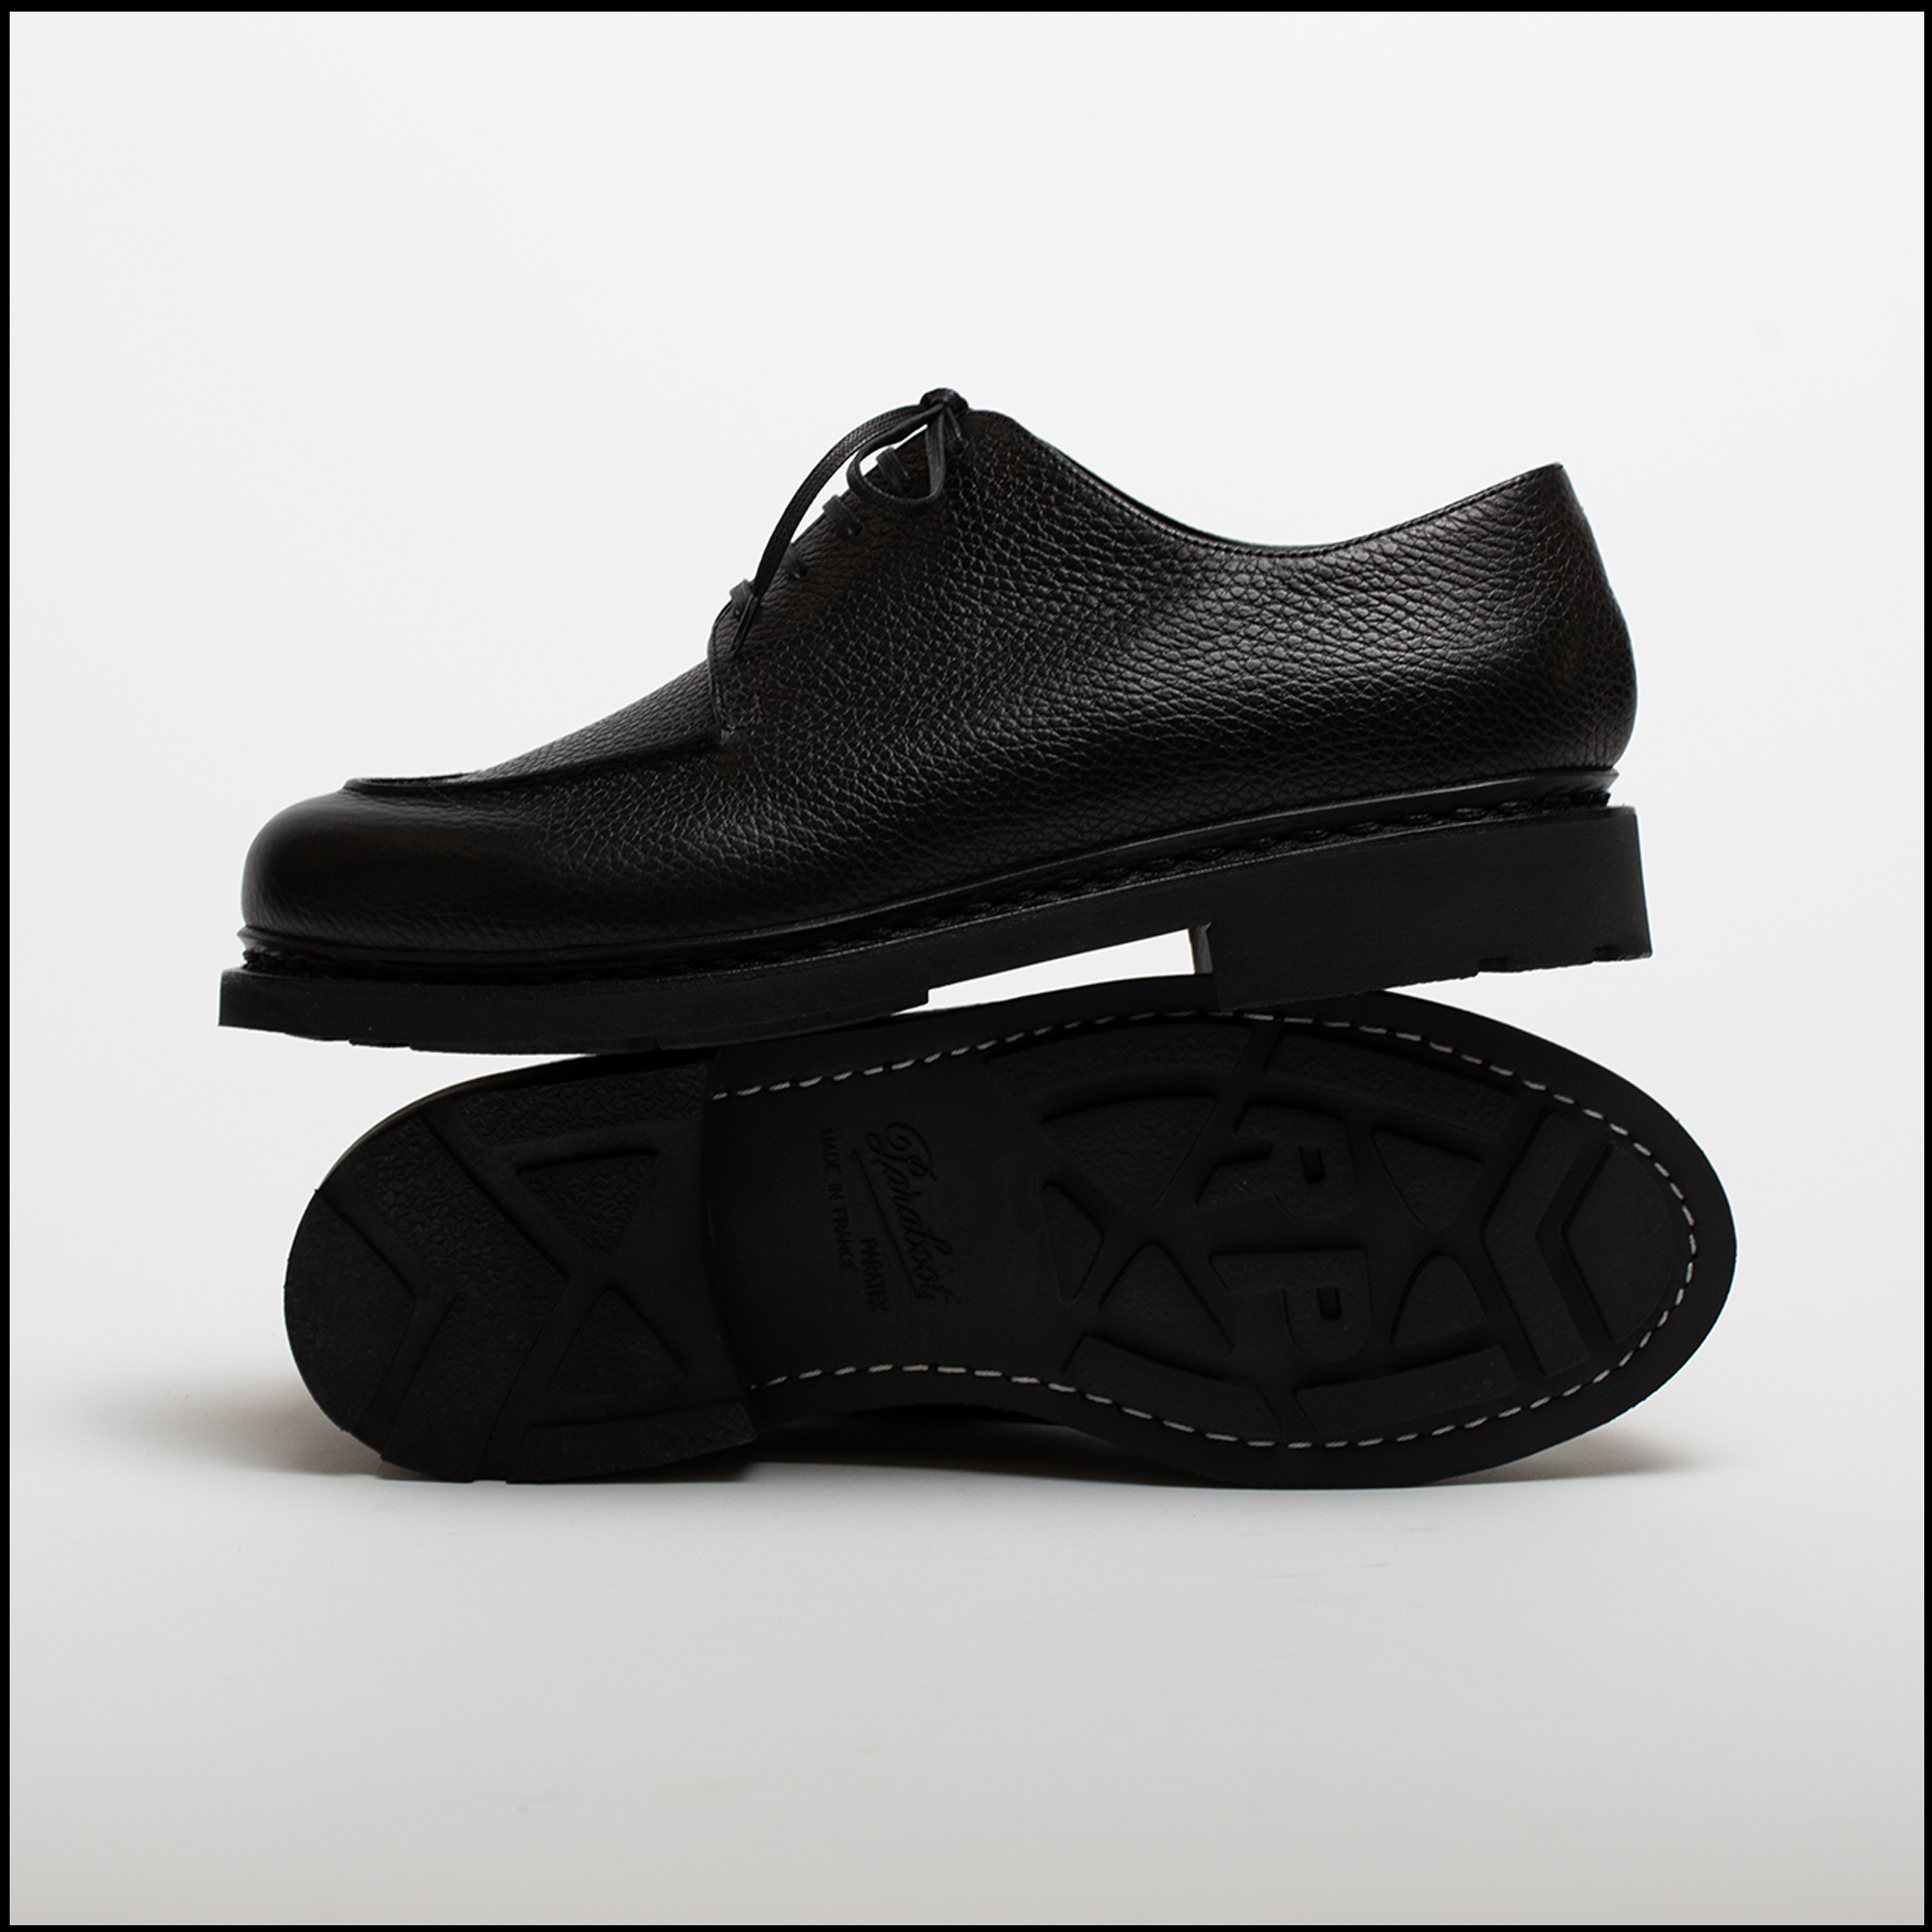 MIRAGE shoes in Black color by Paraboot for Arpenteur